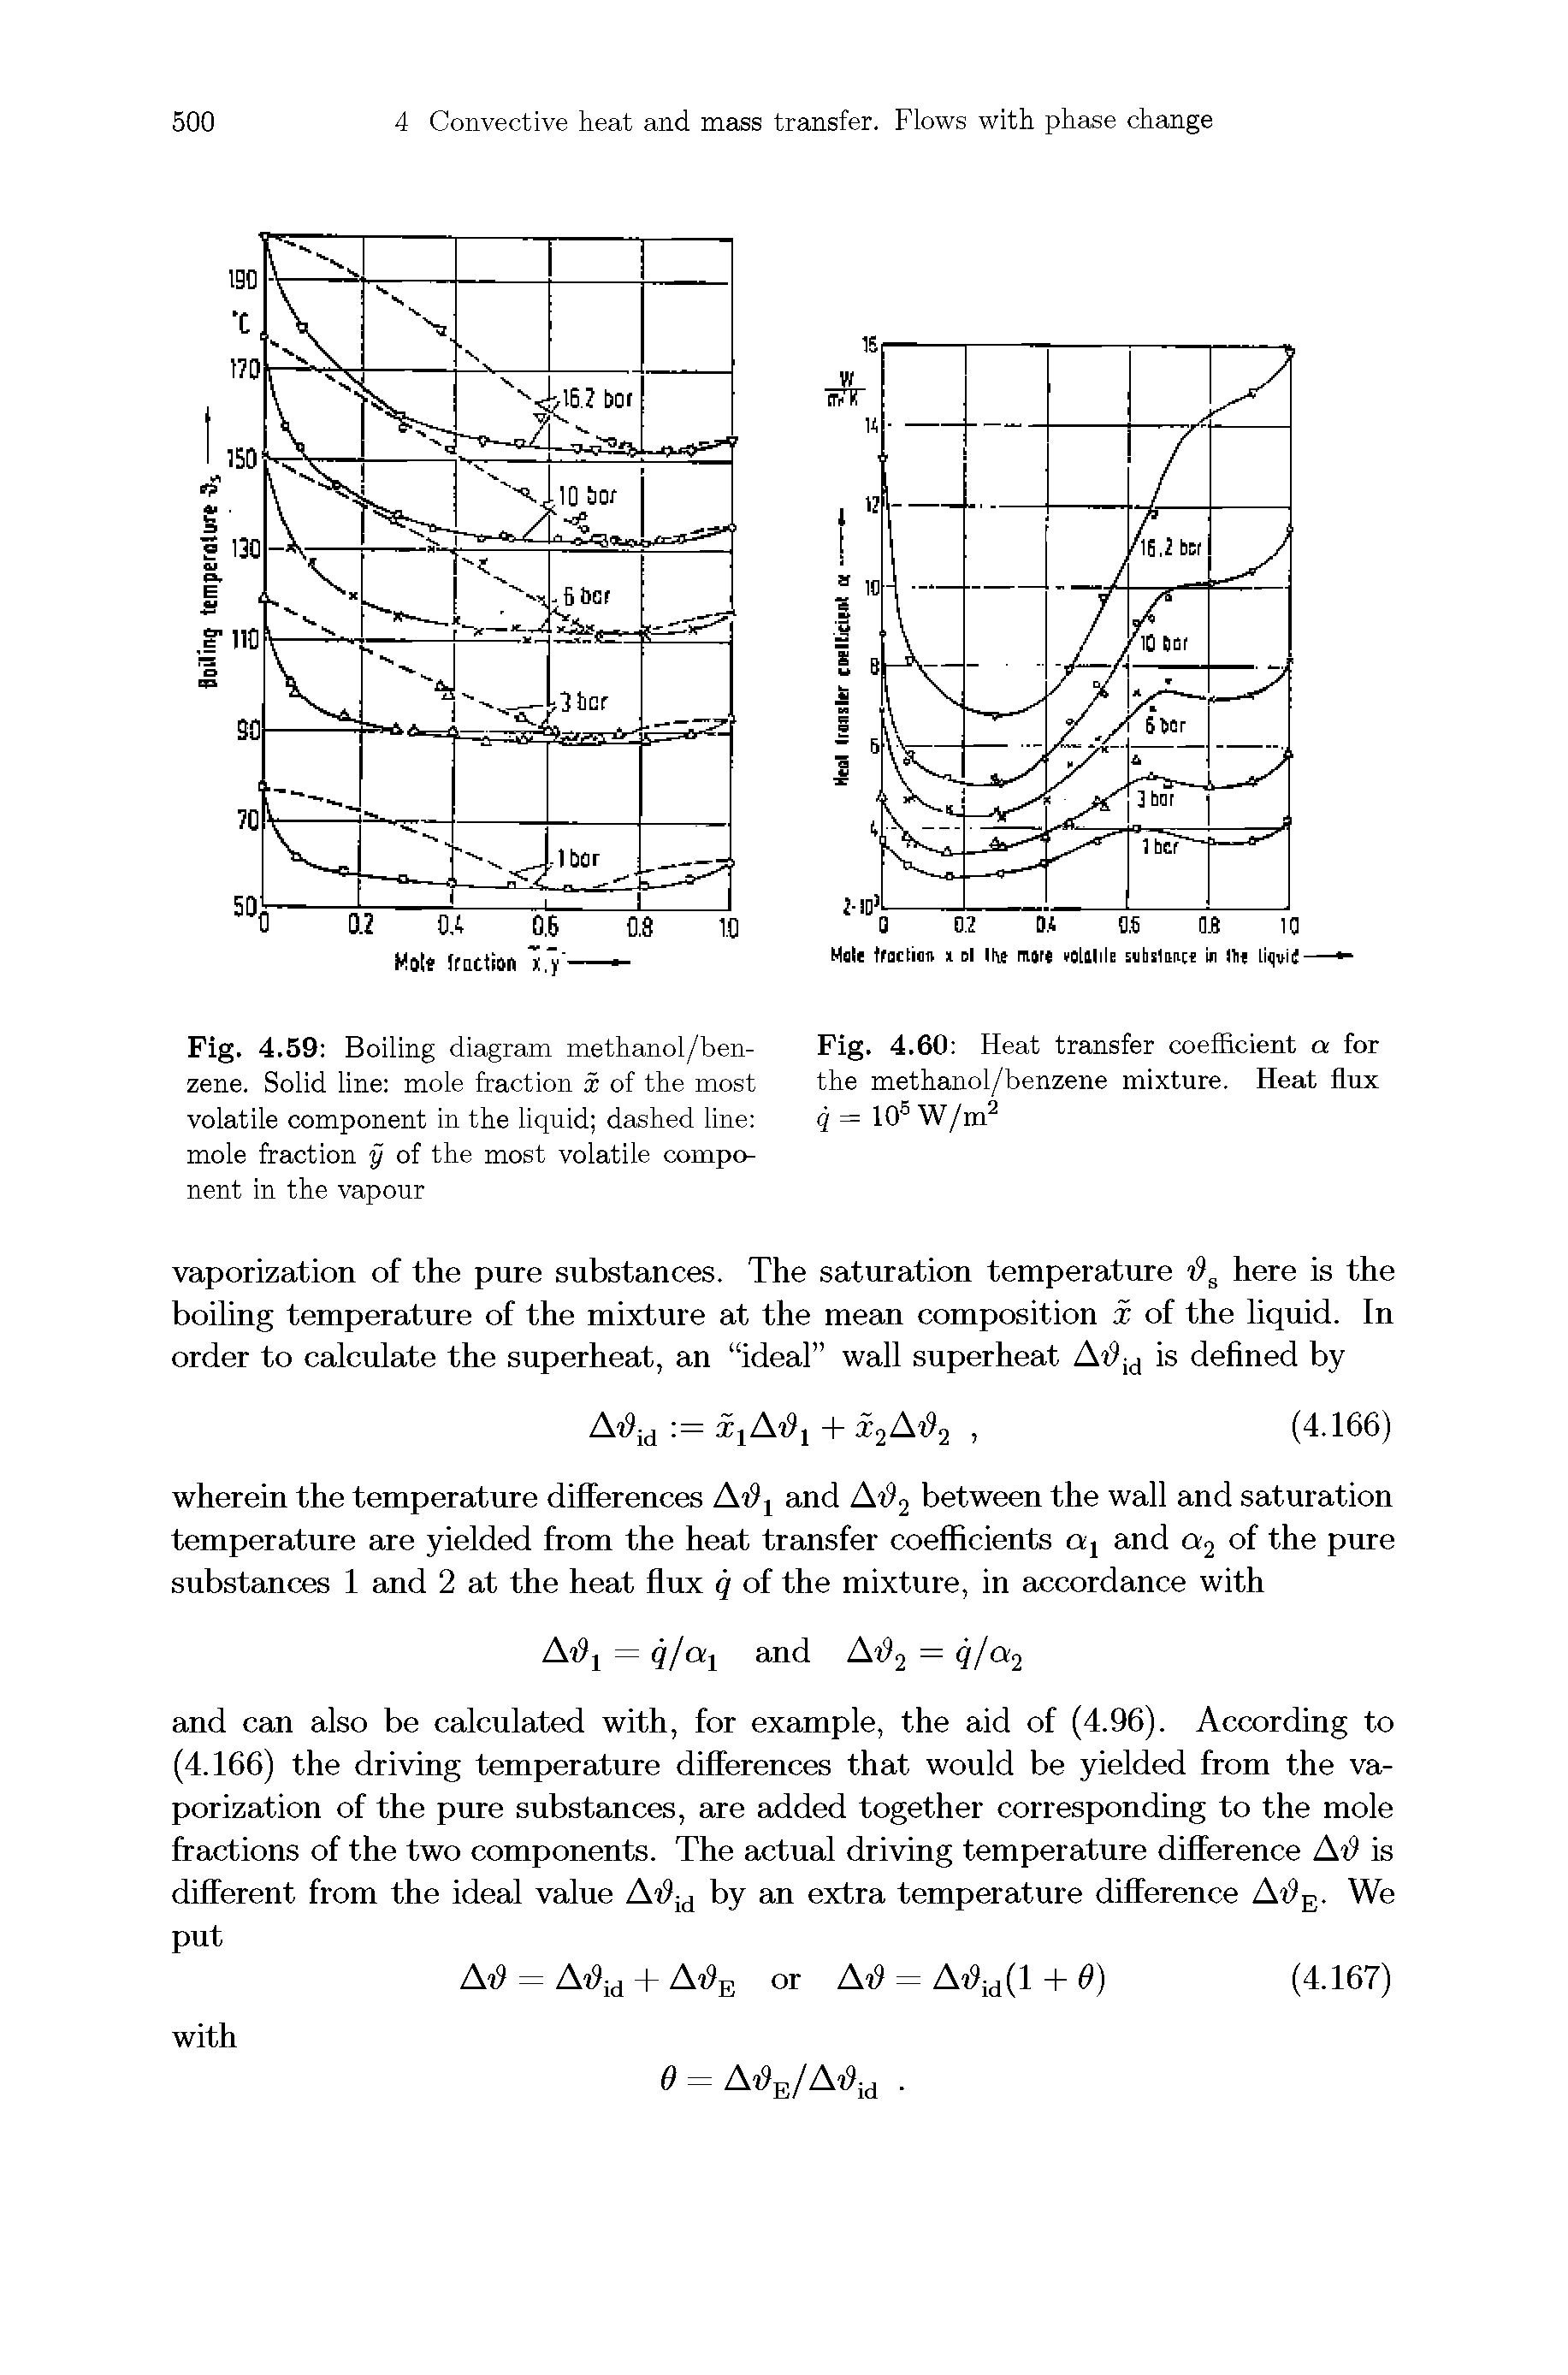 Fig. 4.59 Boiling diagram methanol/ben-zene. Solid line mole fraction x of the most volatile component in the liquid dashed line mole fraction y of the most volatile component in the vapour...